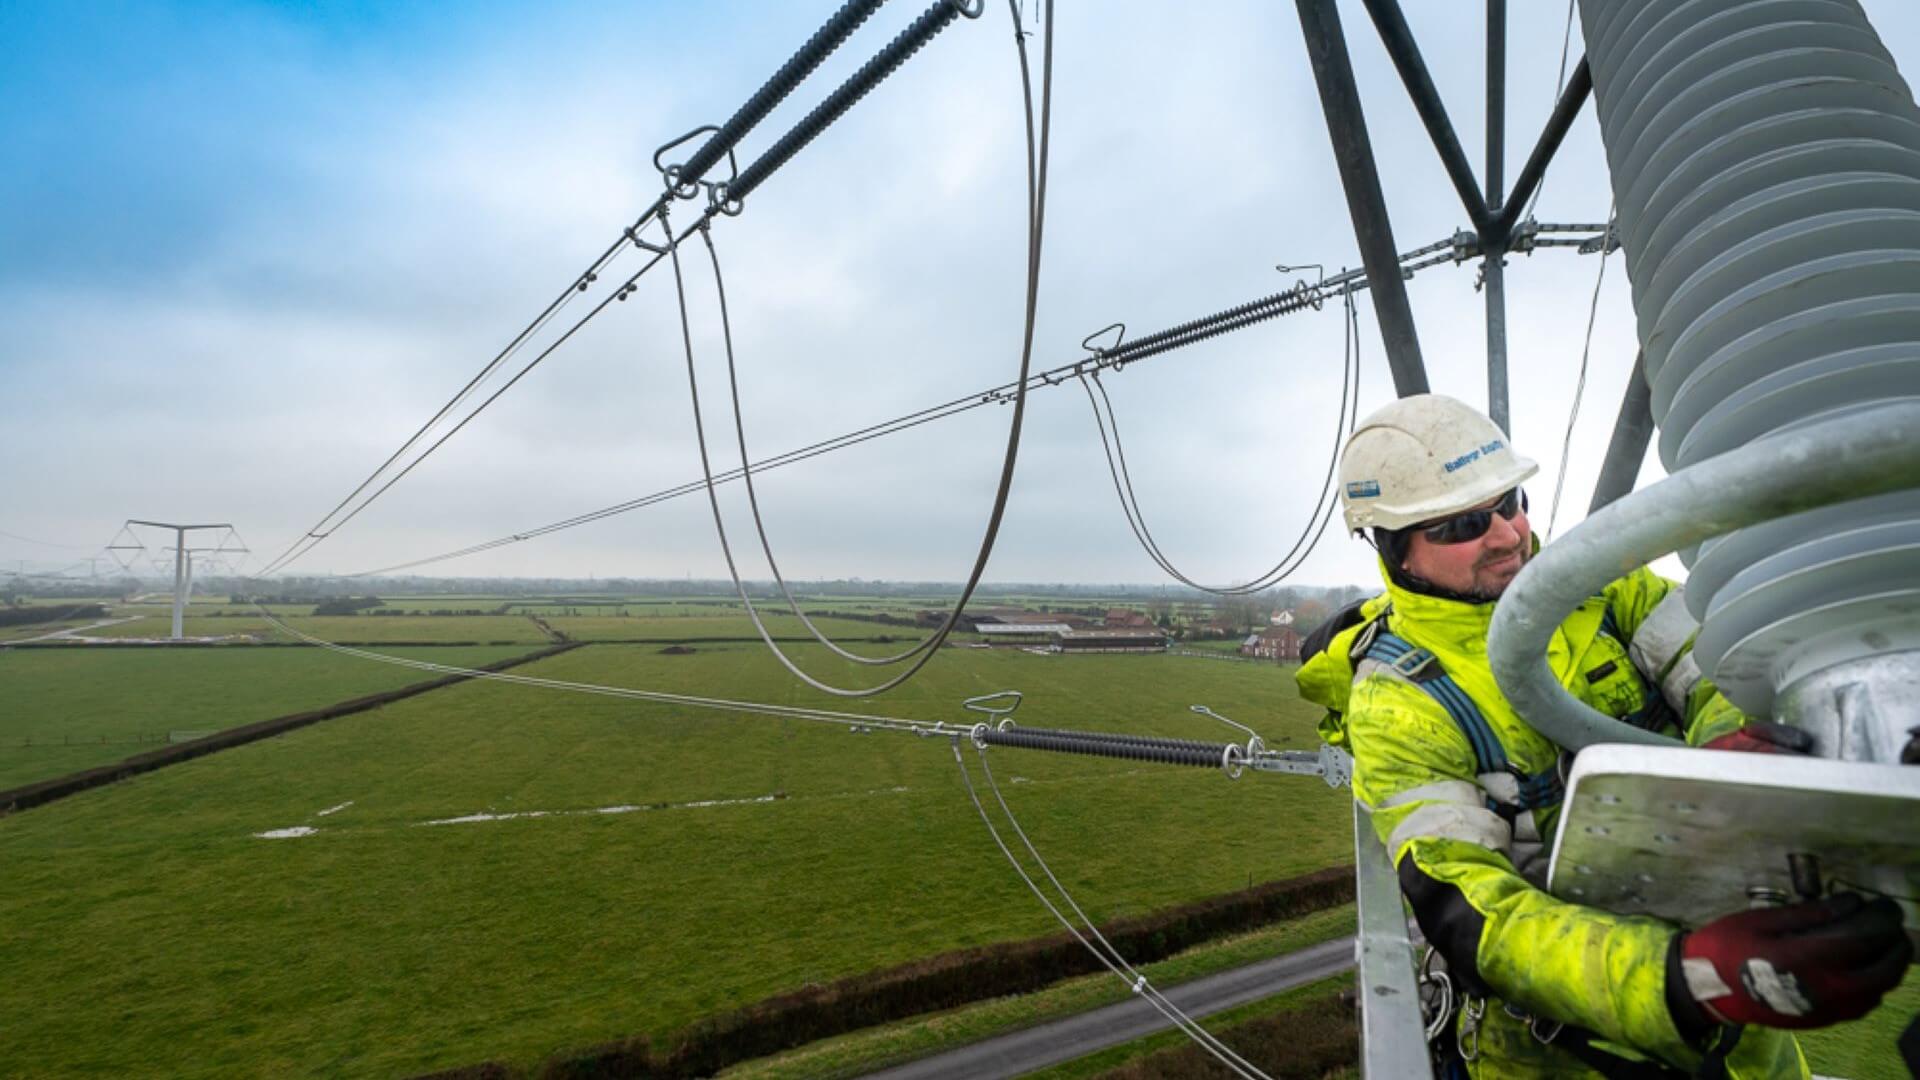 Engineer stringing conductors from new T-pylon to carry electricity from Hinkley Point C